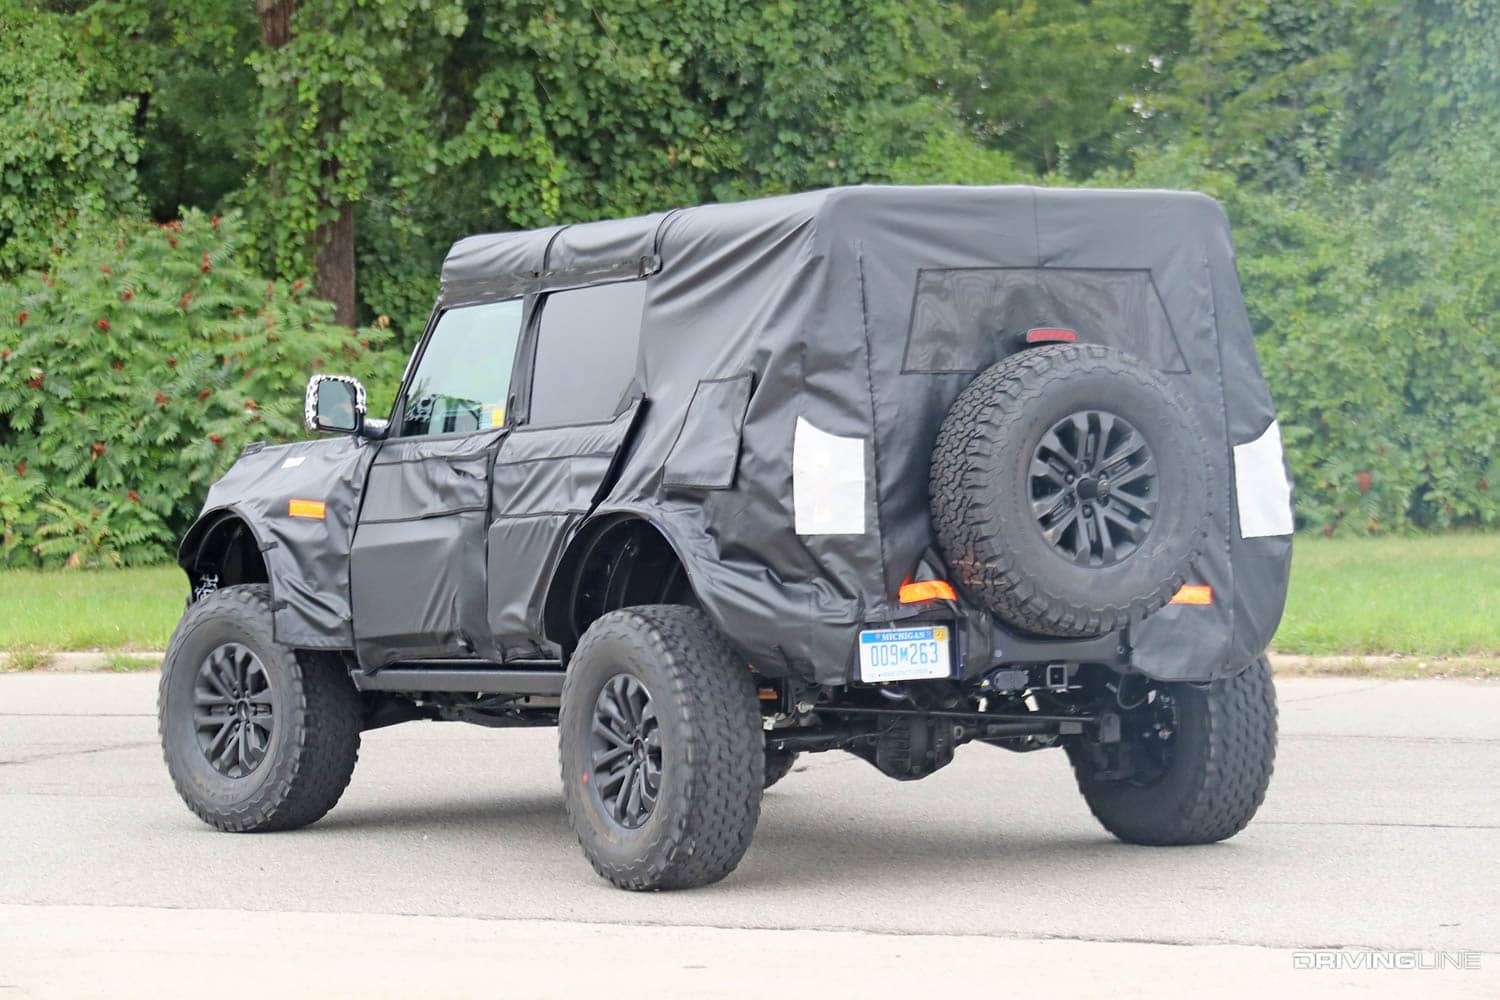 Spy Photos: Is this the New Ford Bronco Raptor? | DrivingLine